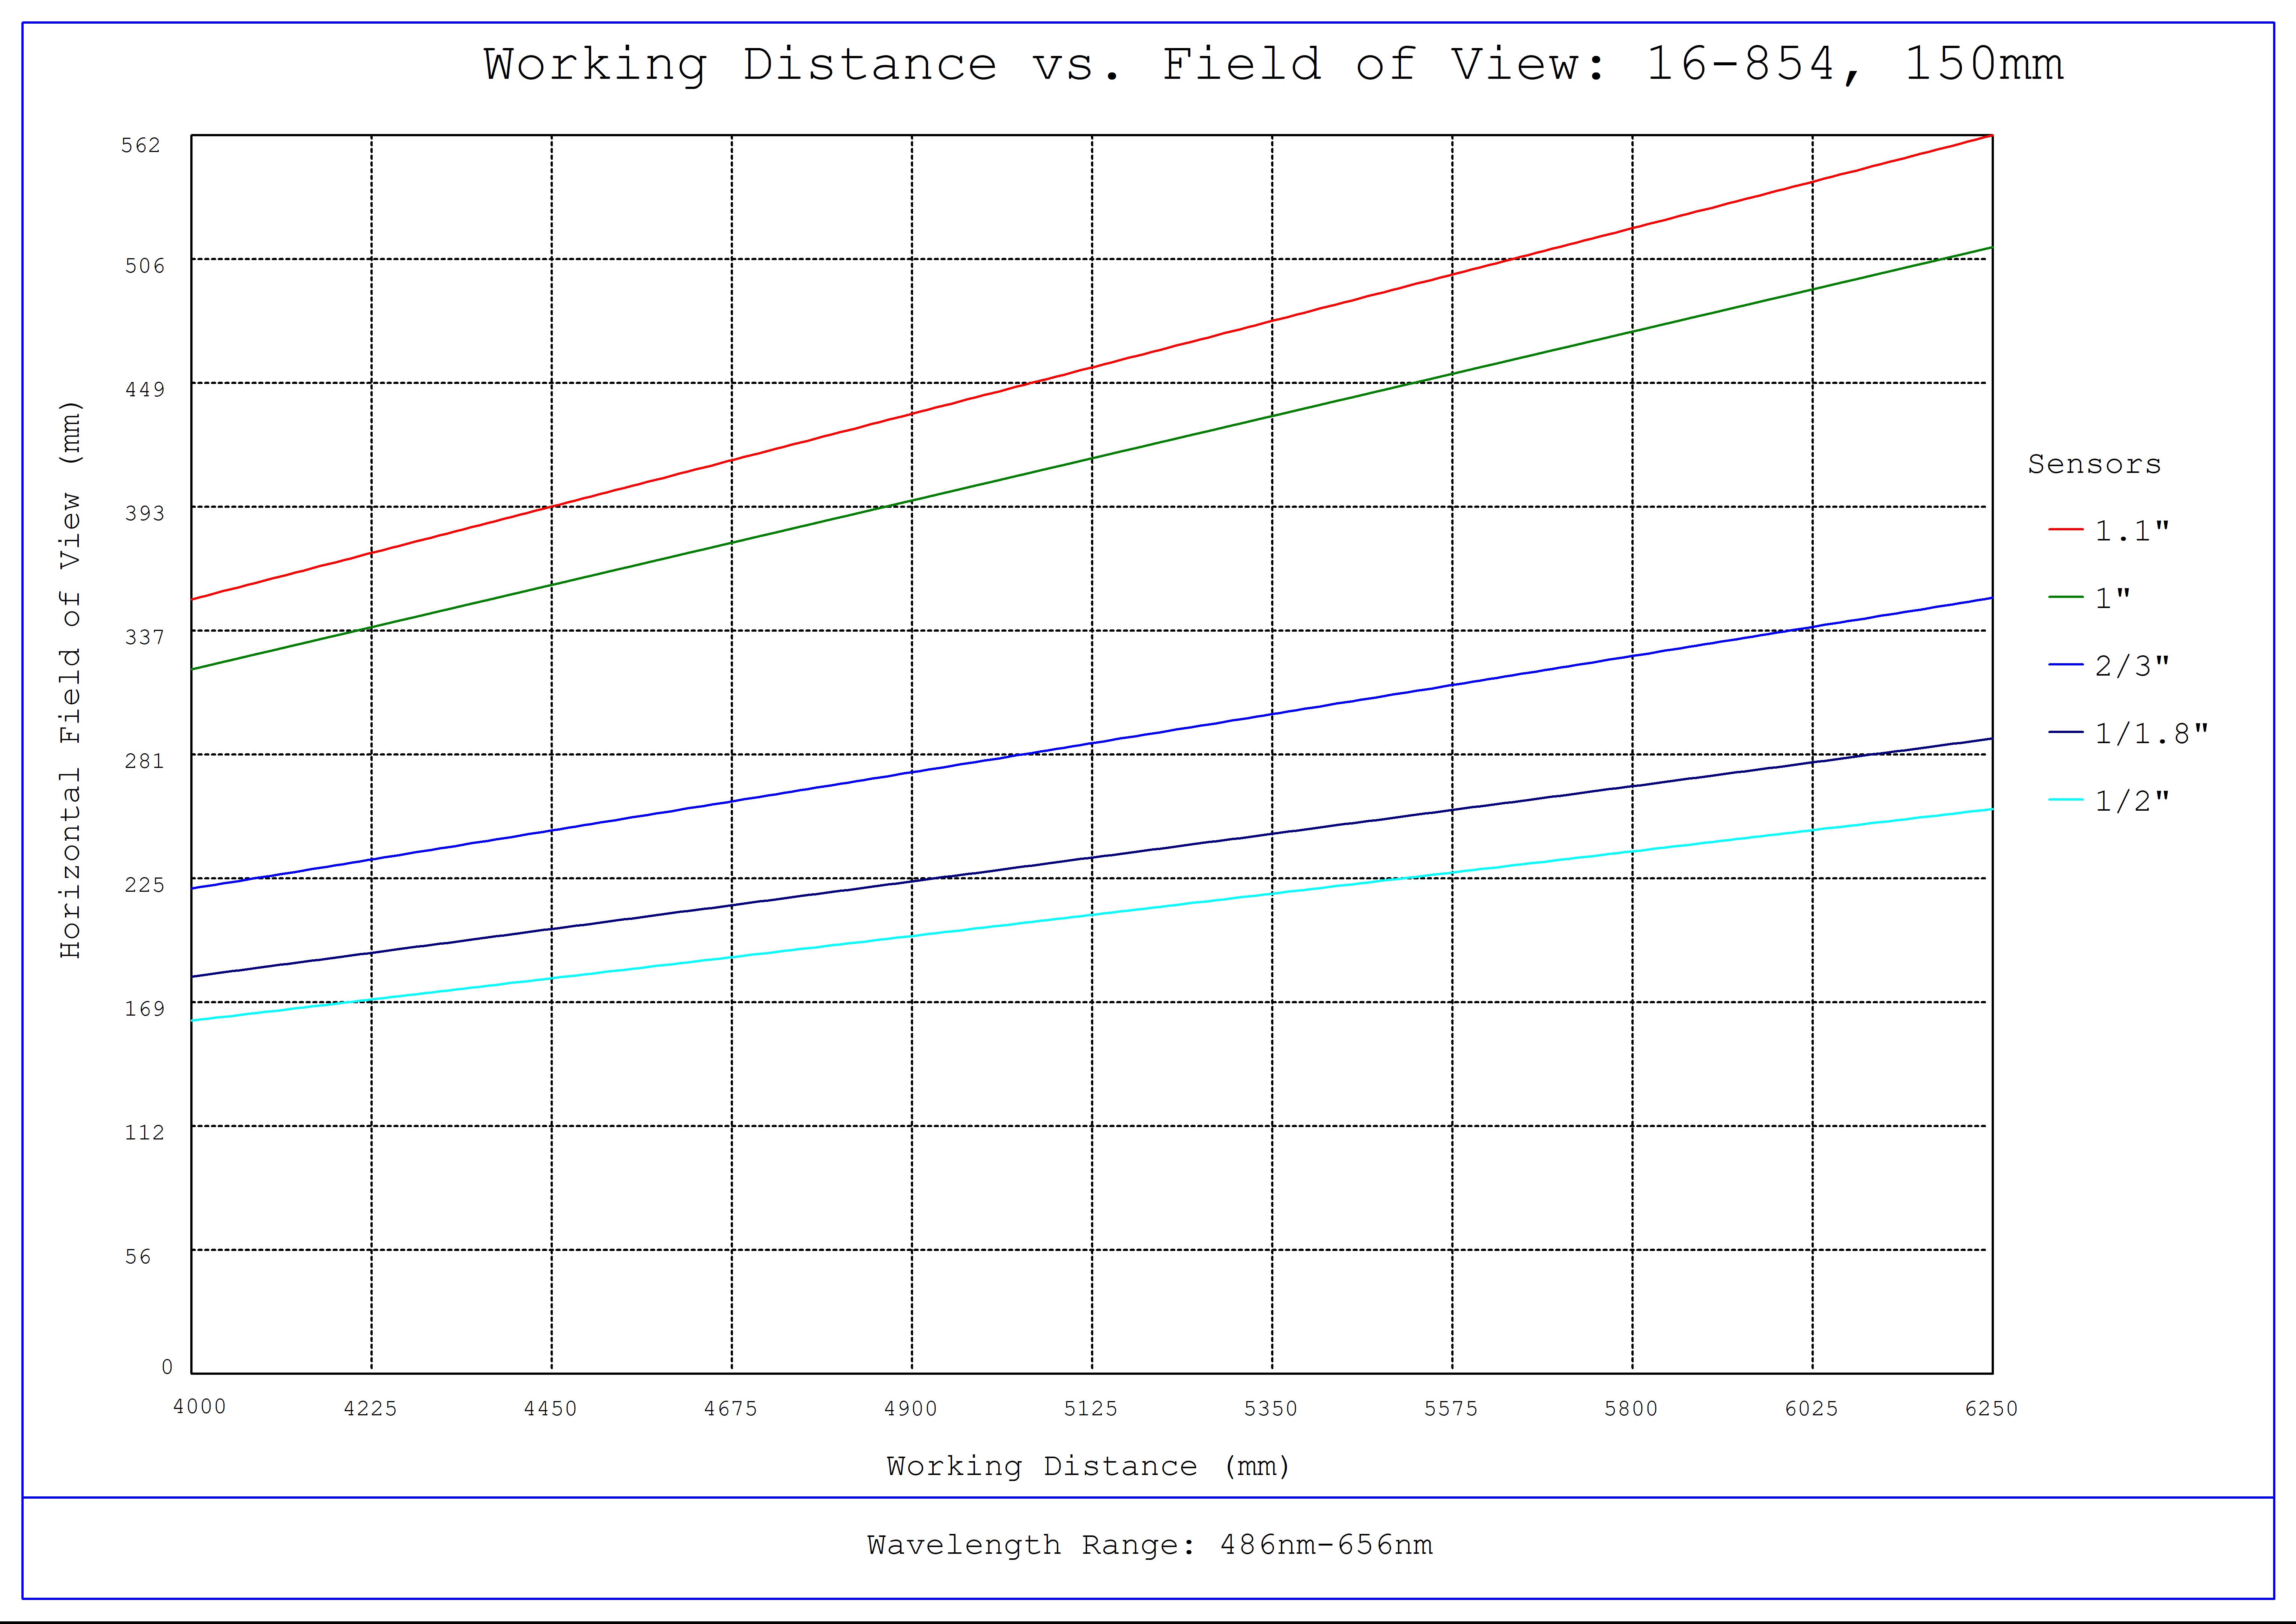 #16-854, 150mm, f/8 Athermal Lens, Working Distance versus Field of View Plot